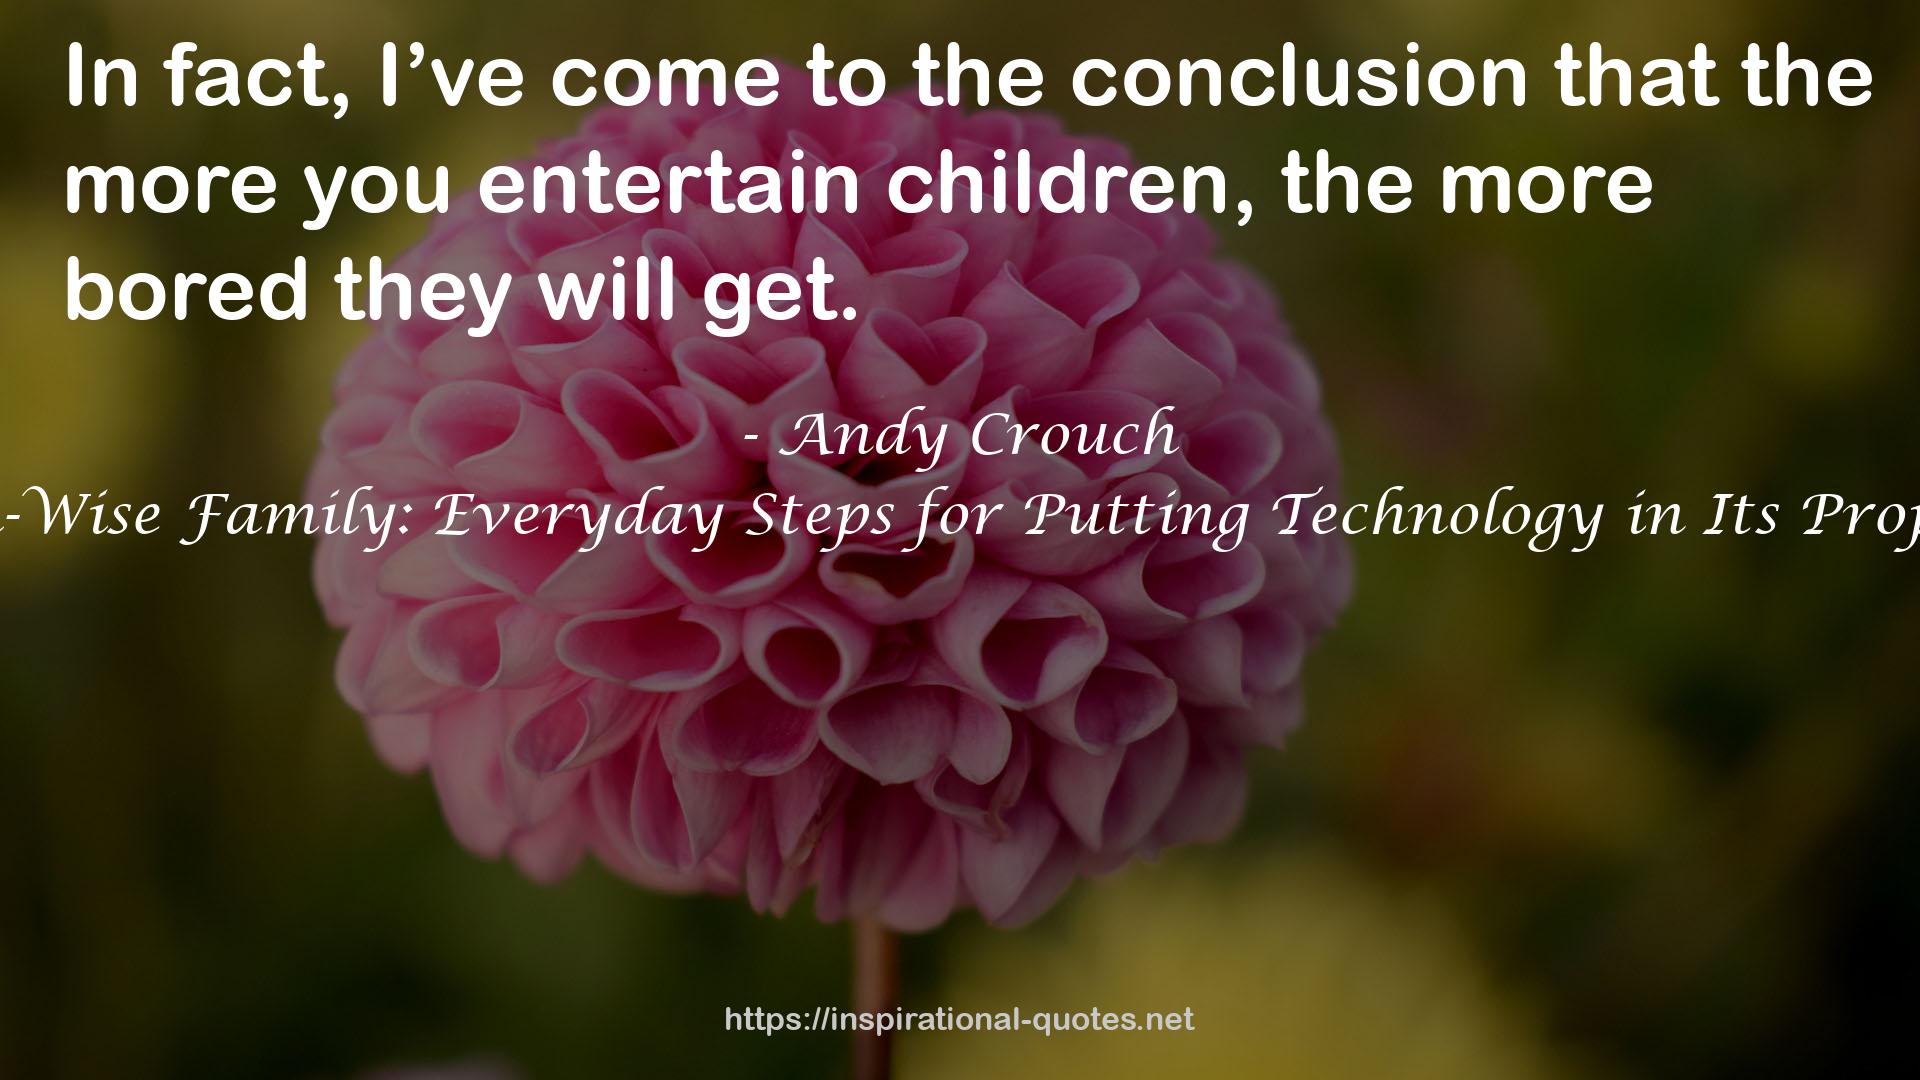 The Tech-Wise Family: Everyday Steps for Putting Technology in Its Proper Place QUOTES